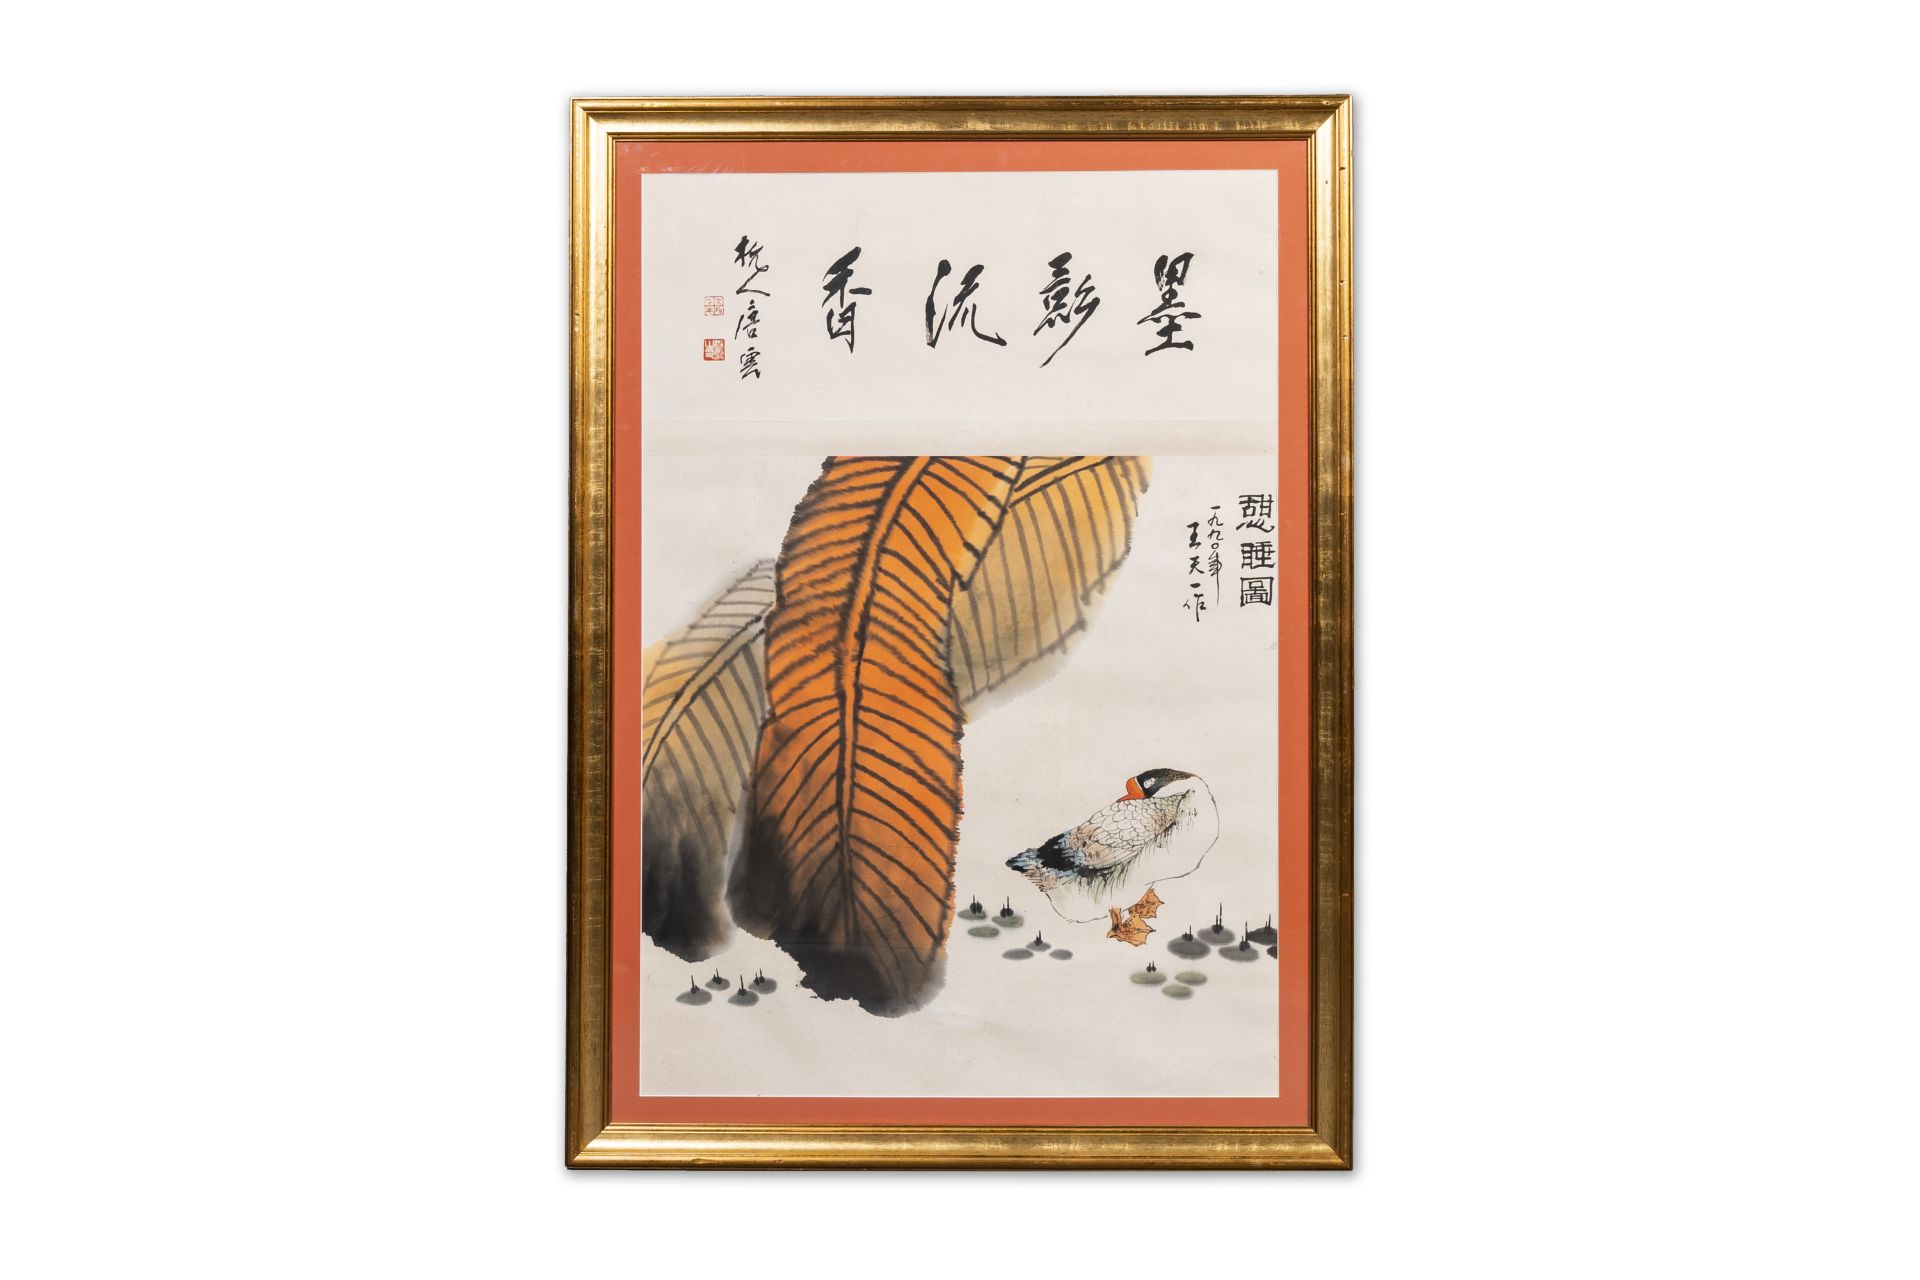 Wang Tianyi çŽ‹å¤©ä¸€ (1926-2013): 'Goose and calligraphy', ink and colour on paper, dated 1990